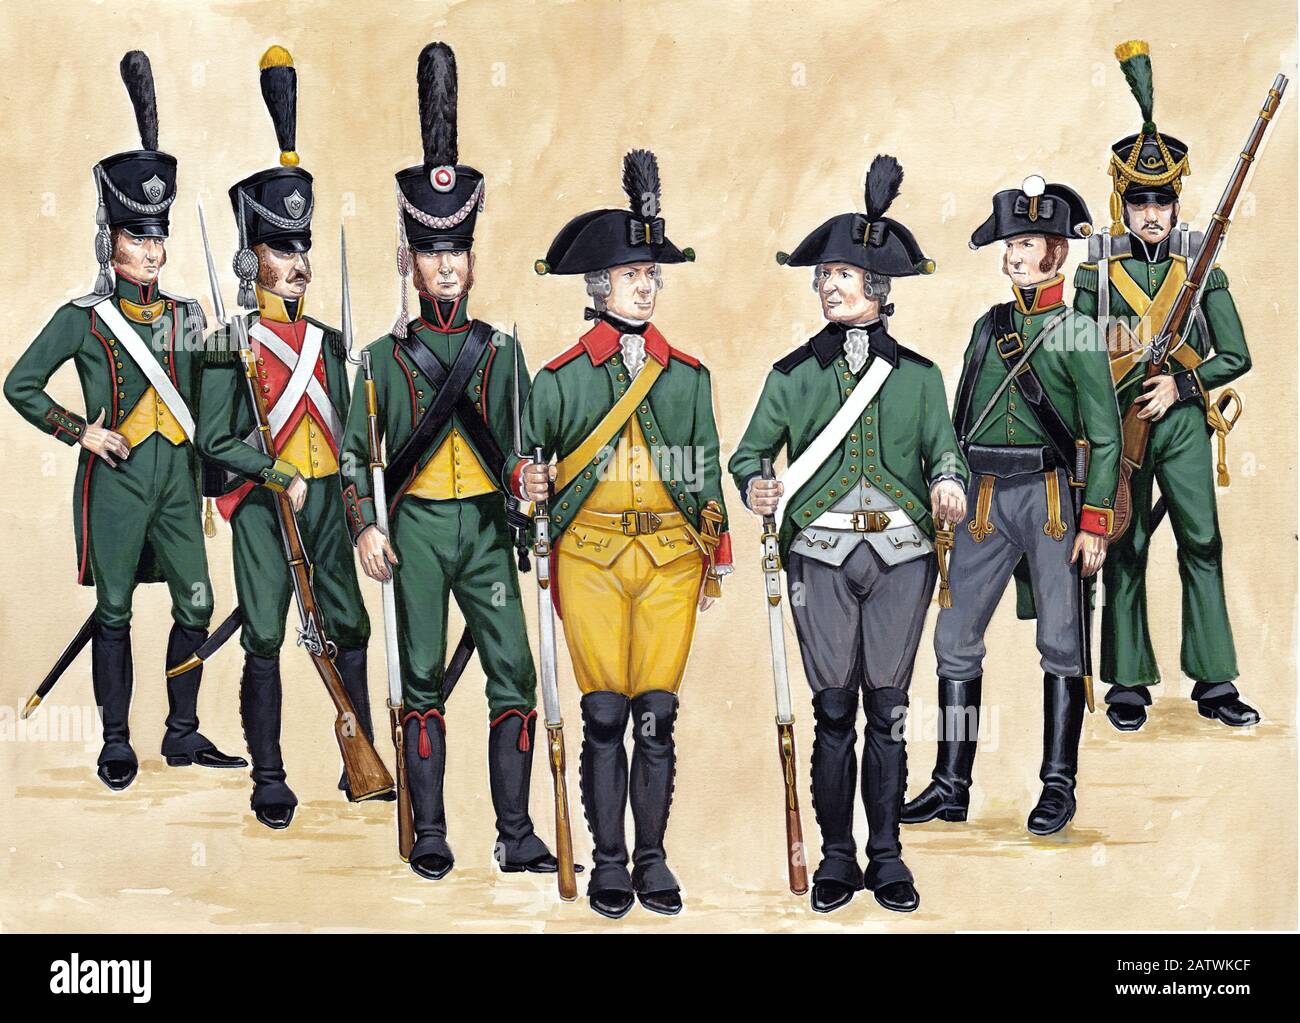 German infantry regiment illustration. Soldiers and officers before the battle. Military uniform illustration. Stock Photo